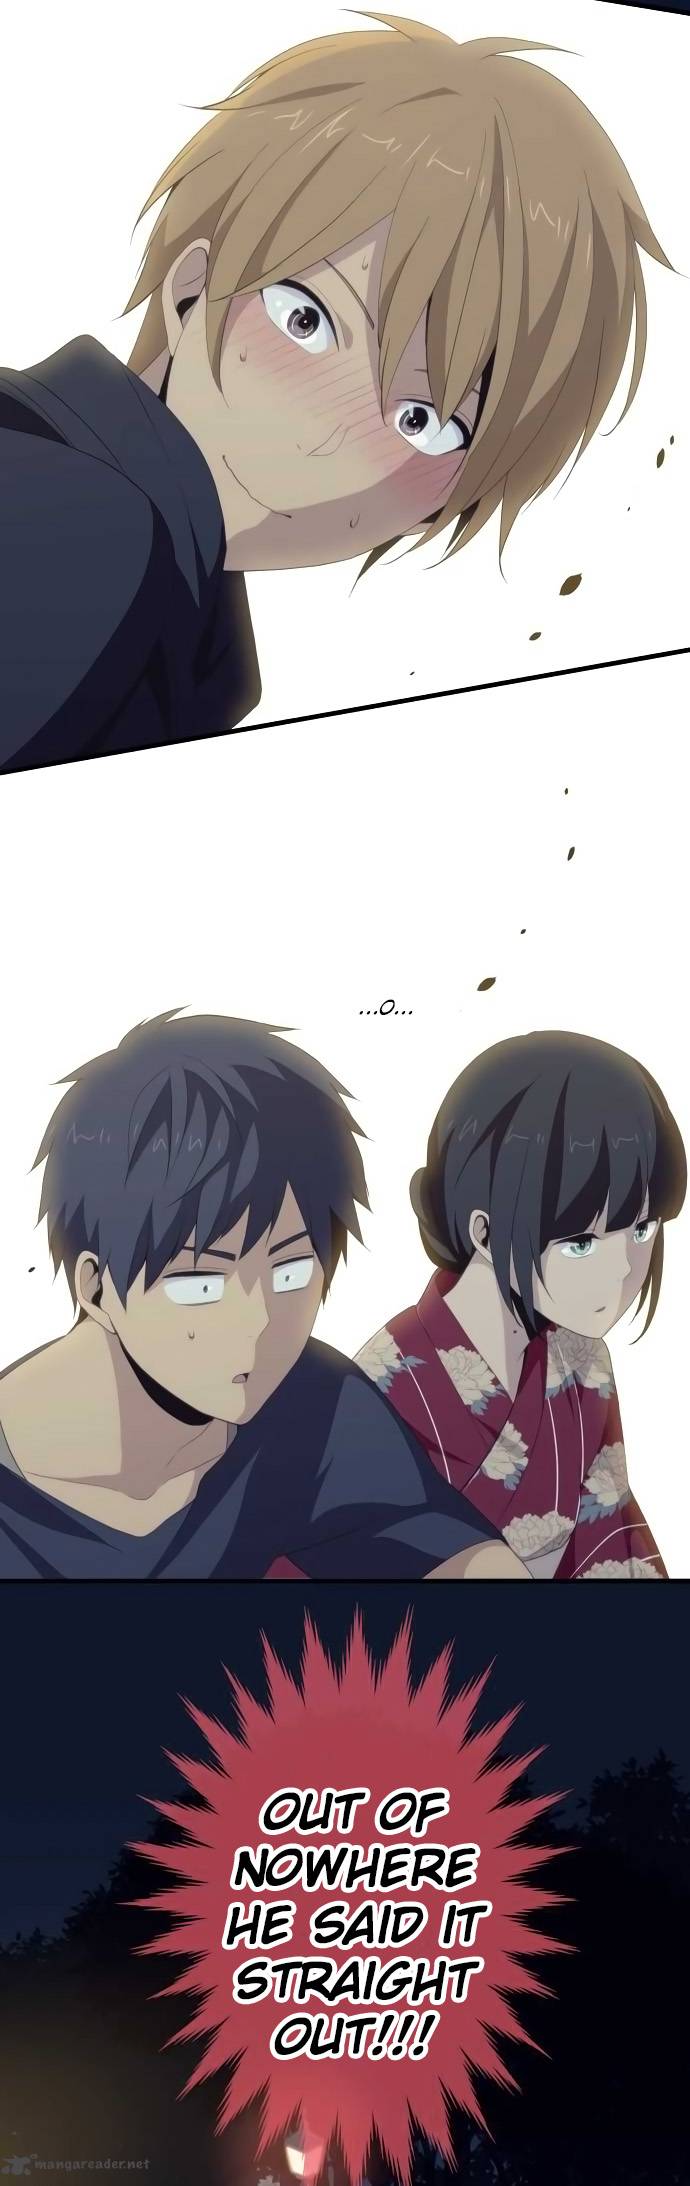 Relife 105 13